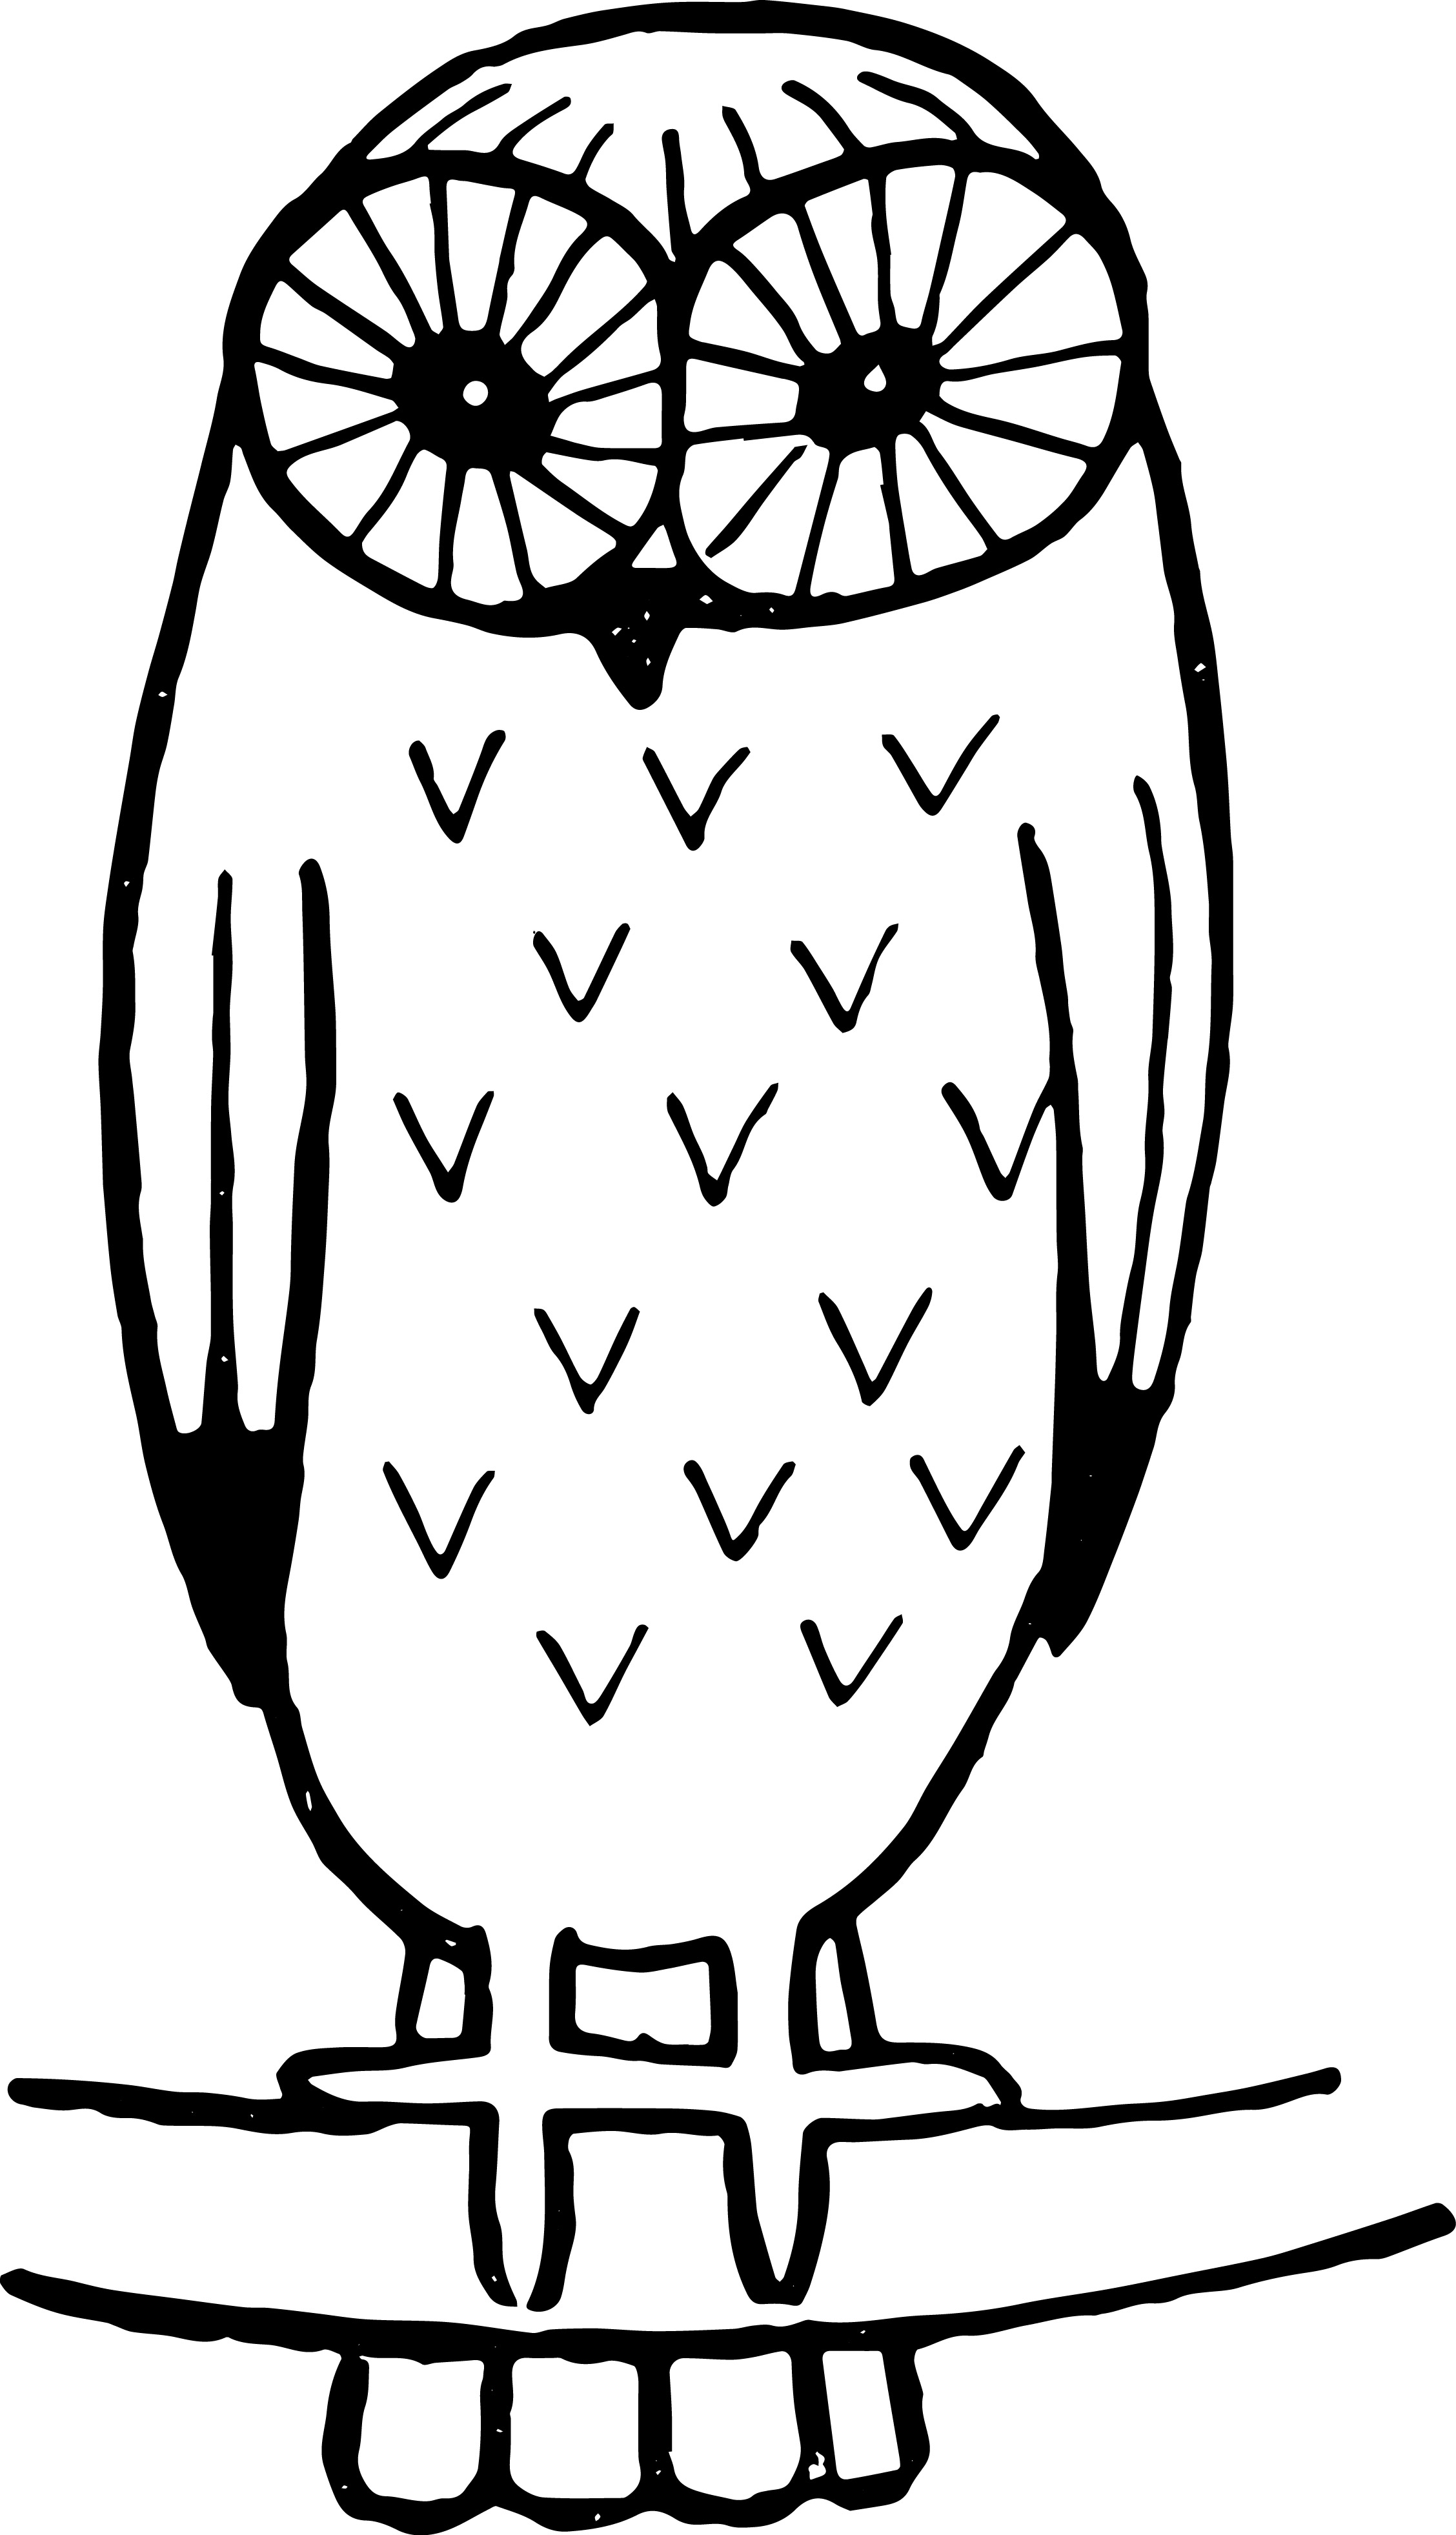 owl images clipart black and white - photo #42